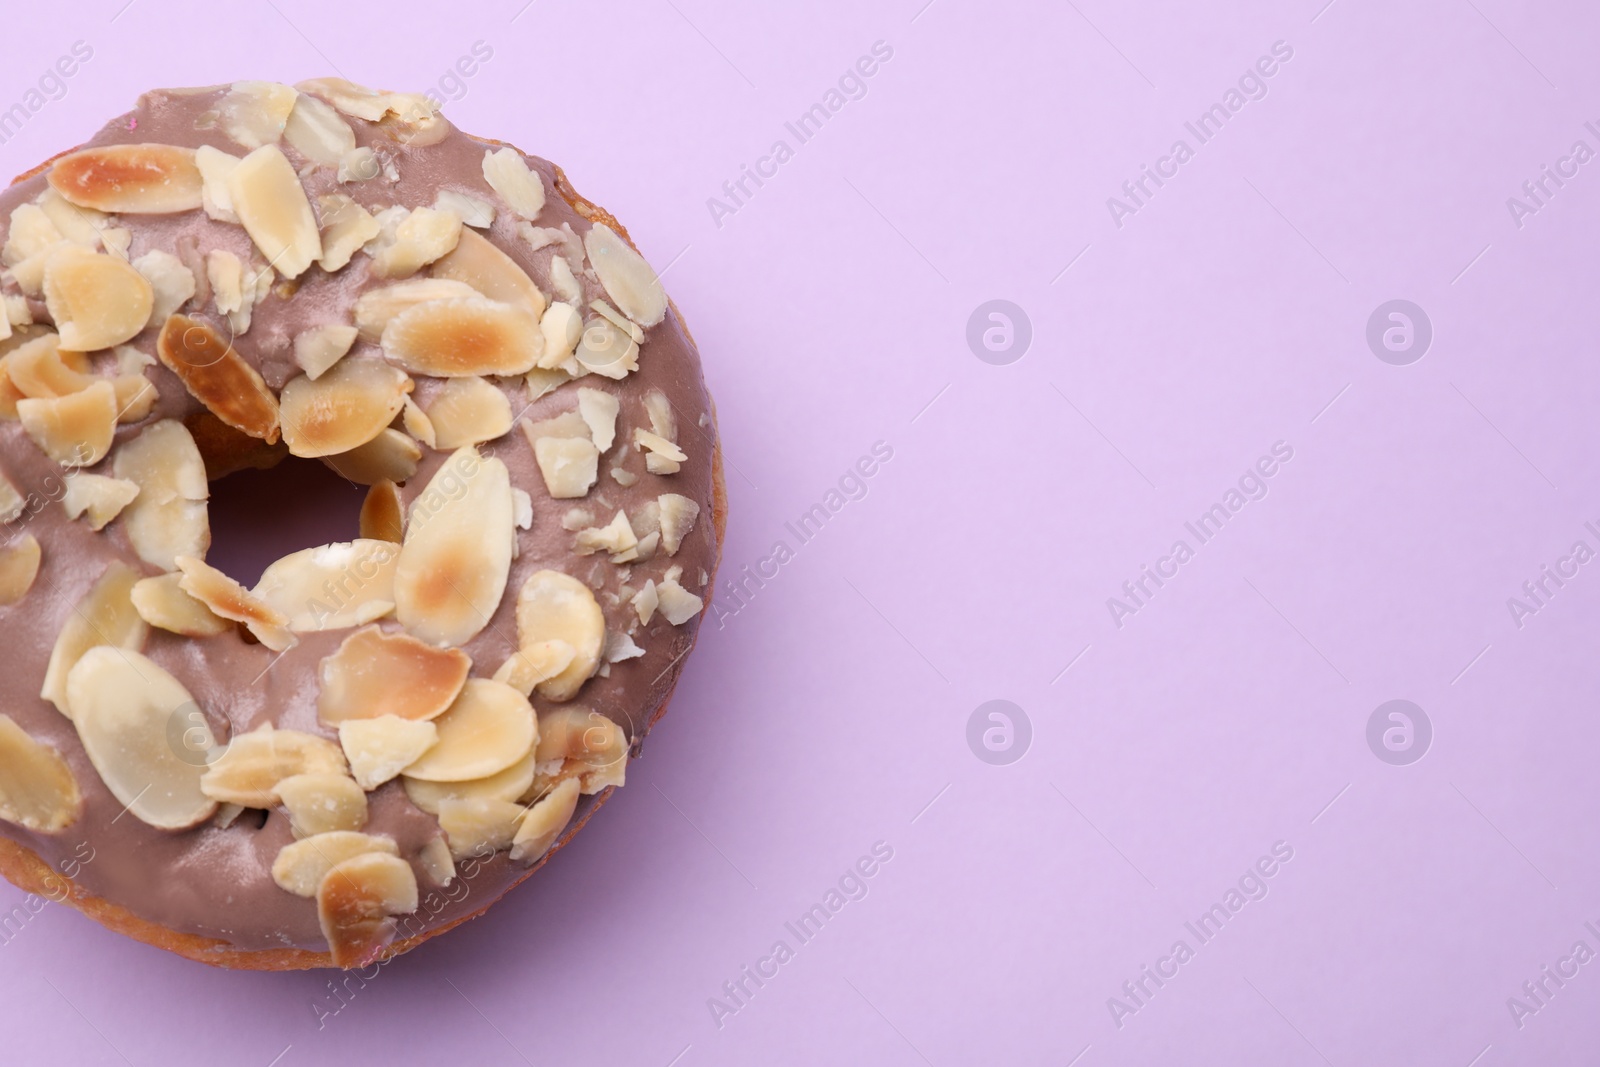 Photo of Tasty glazed donut decorated with nuts on purple background, top view. Space for text